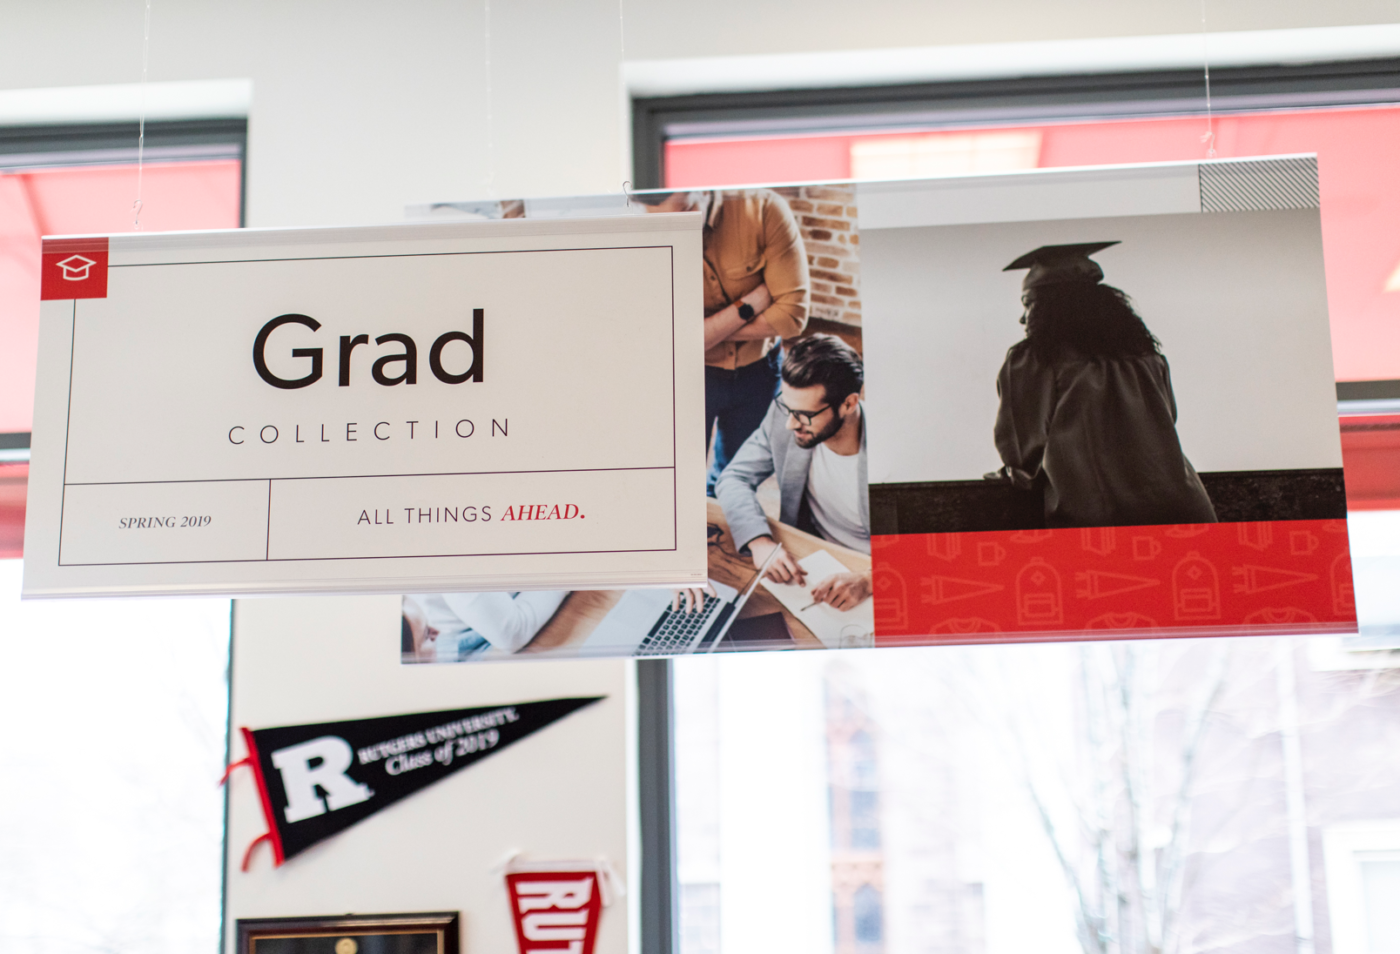 Signage of store says "Grad COLLECTION"